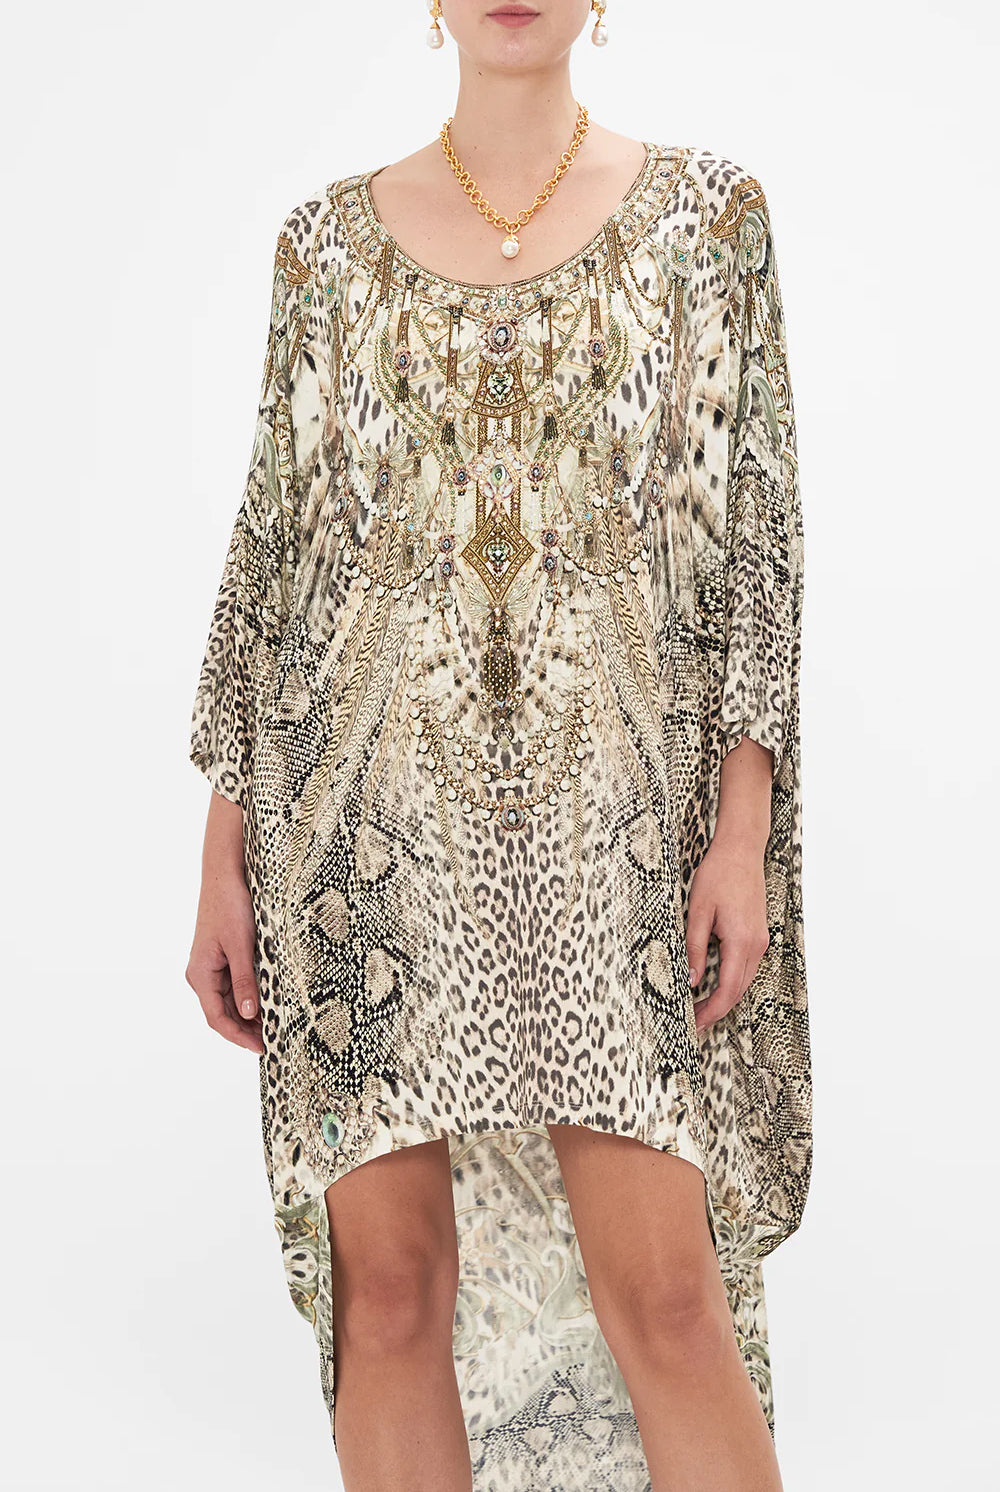 B.O.G Collective Pavia Embroidered Dress in Moss